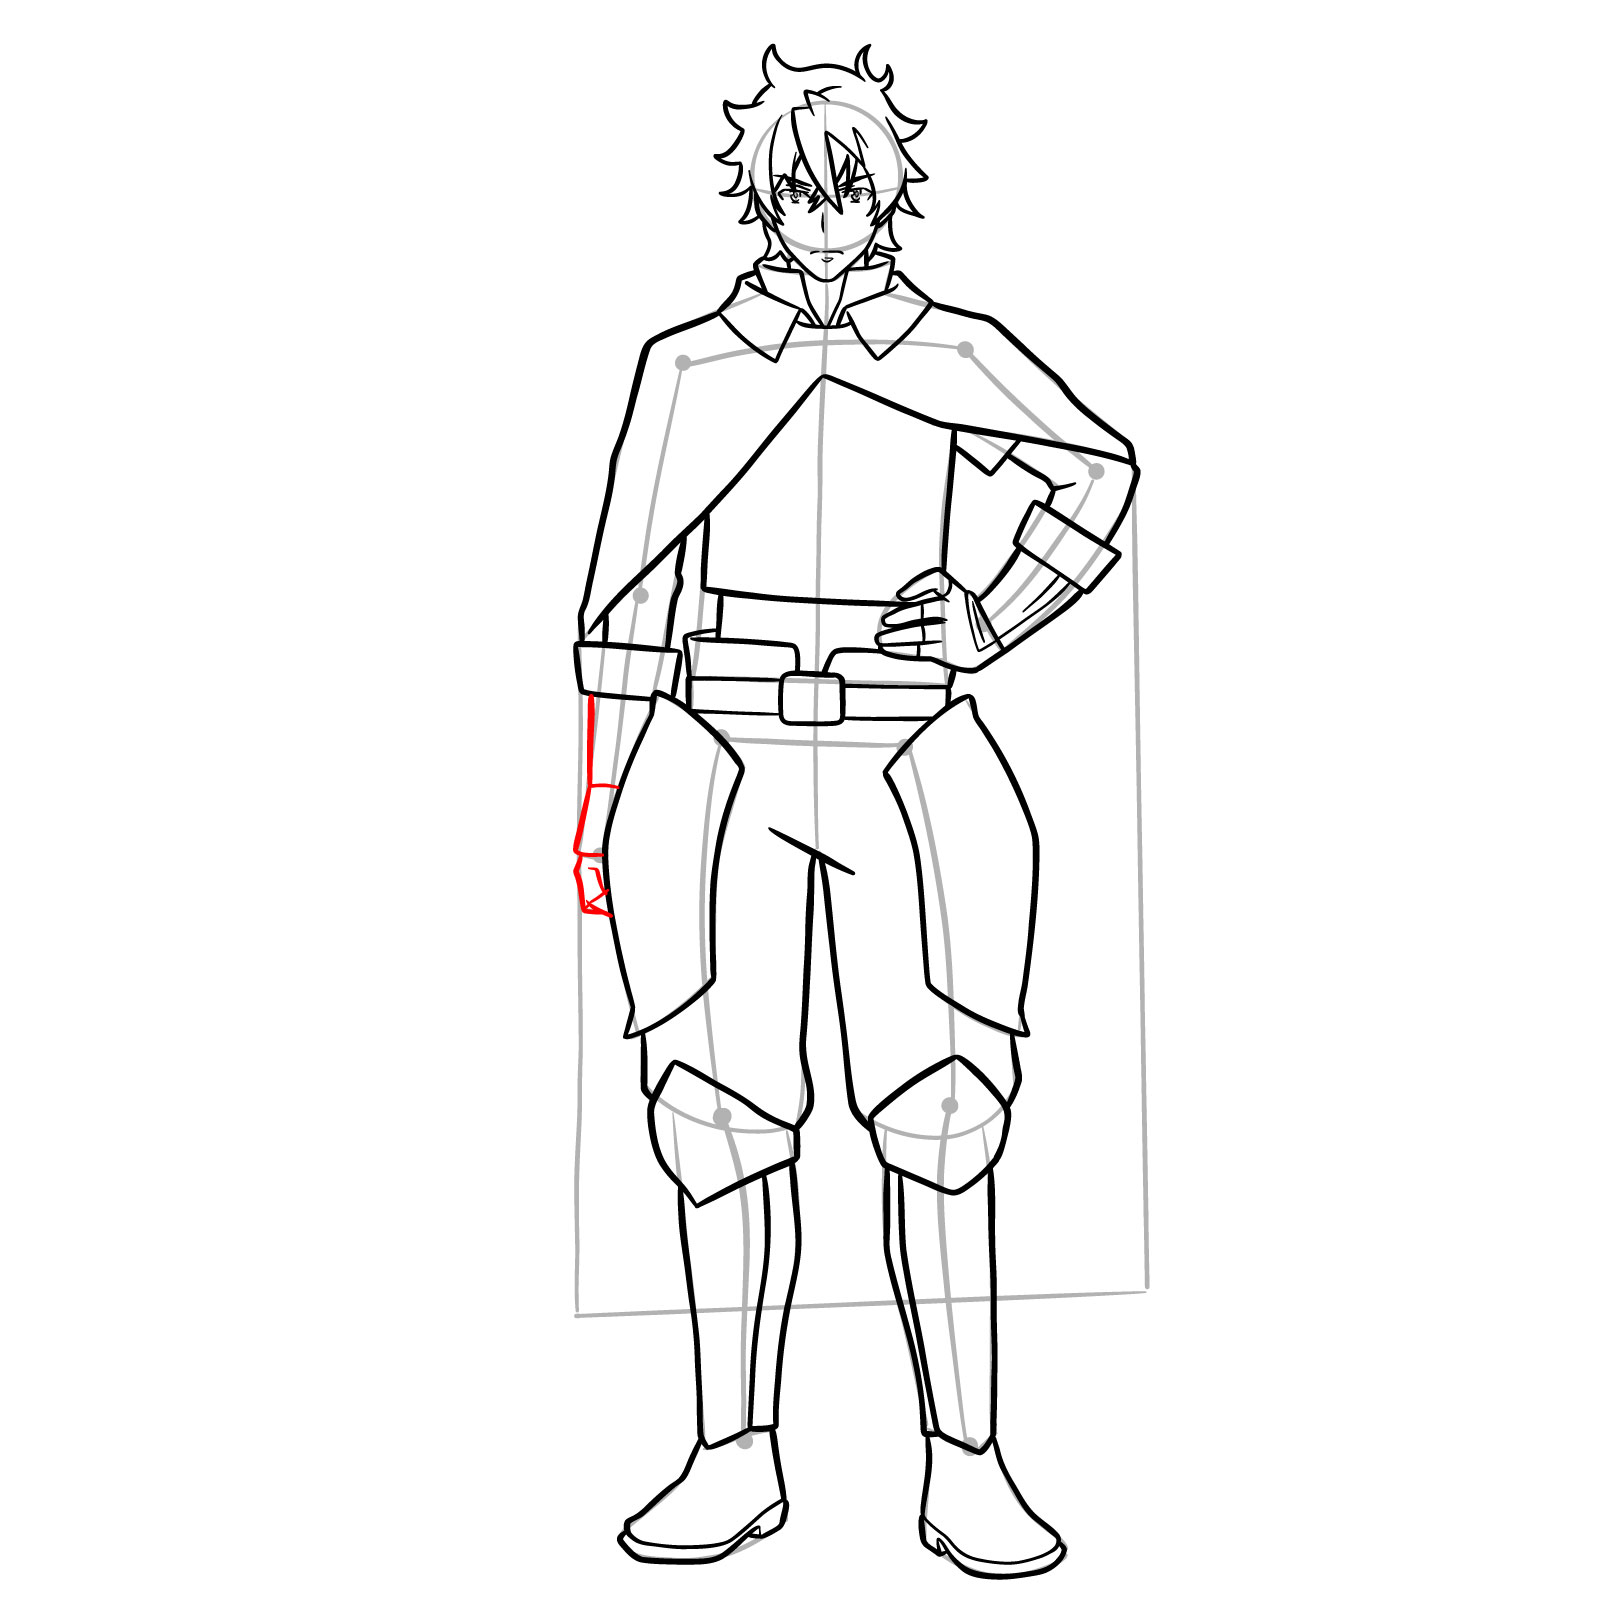 How to draw Naofumi Iwatani from The Rising of the Shield Hero - step 22